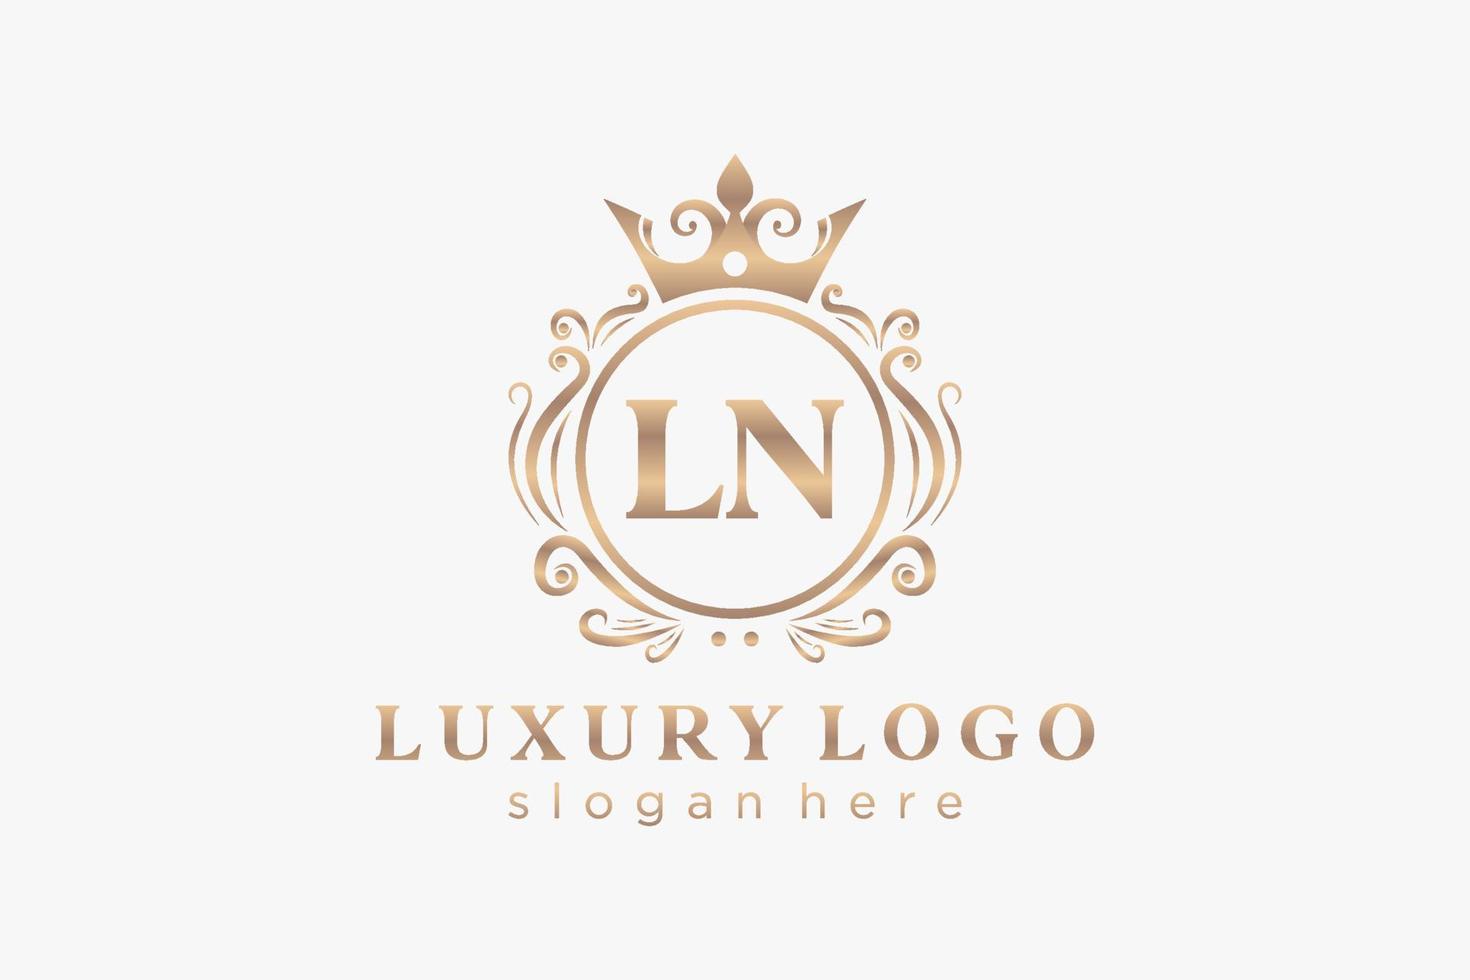 Initial LN Letter Royal Luxury Logo template in vector art for Restaurant, Royalty, Boutique, Cafe, Hotel, Heraldic, Jewelry, Fashion and other vector illustration.